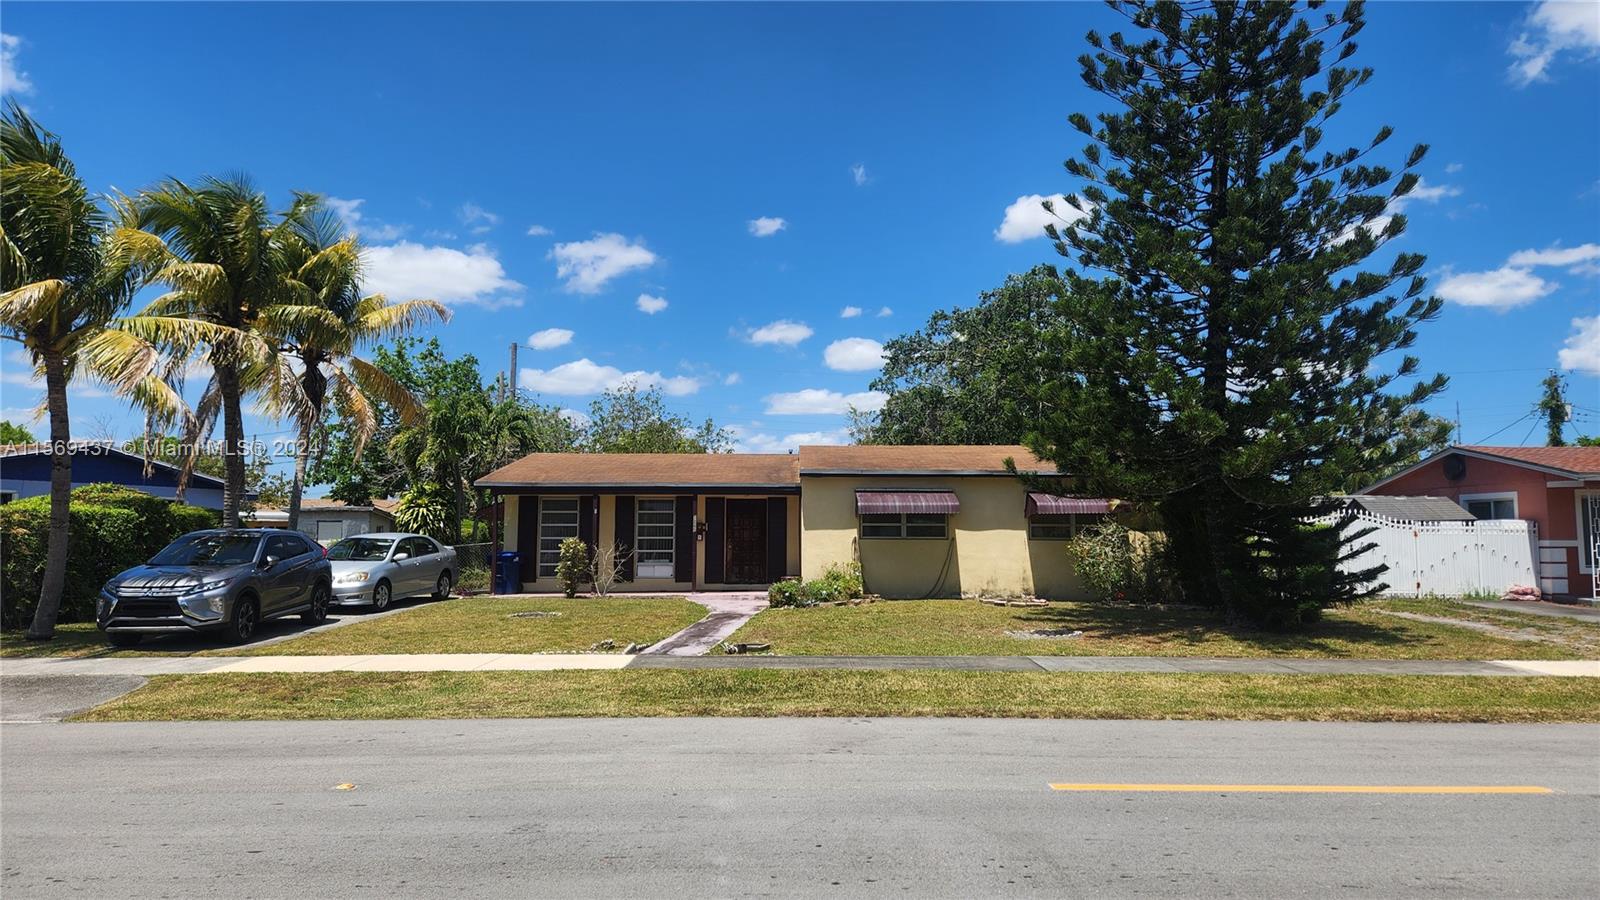 1265 NW 187th St, Miami Gardens, Florida 33169, 3 Bedrooms Bedrooms, ,2 BathroomsBathrooms,Residential,For Sale,1265 NW 187th St,A11569437